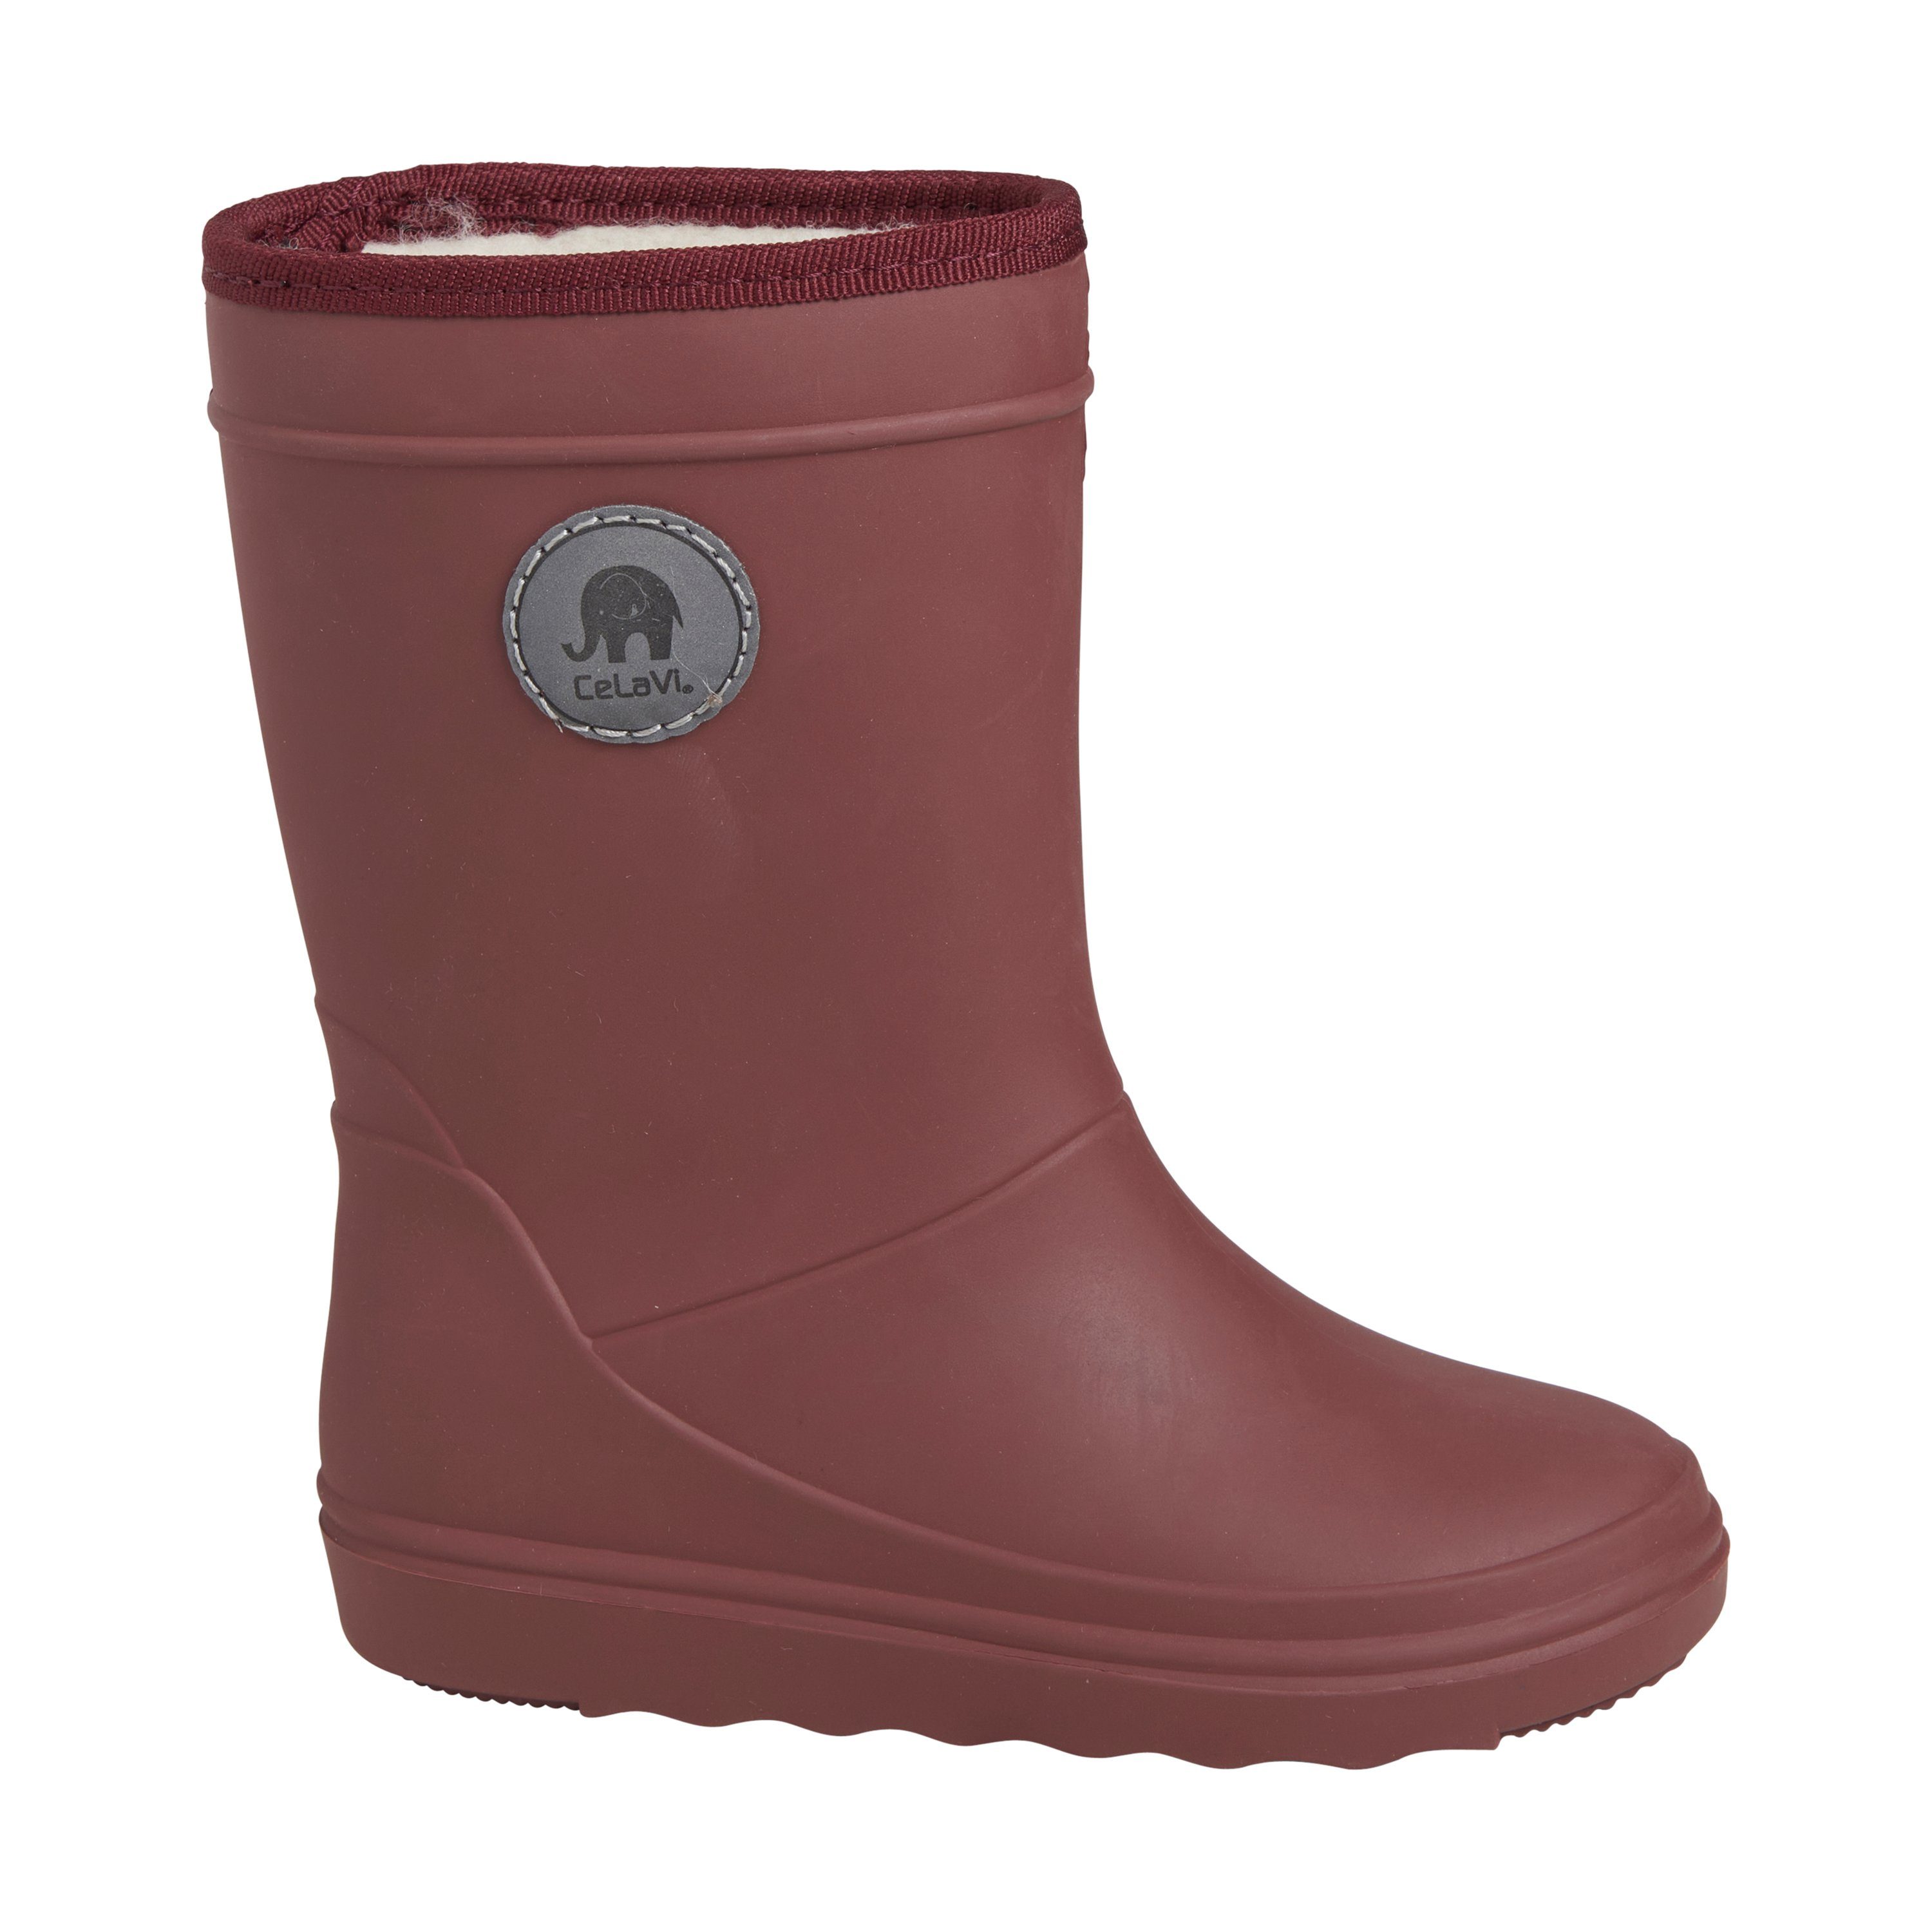 CeLaVi CEThermo Boots 6274 - Brown Rose (694) Winterboots